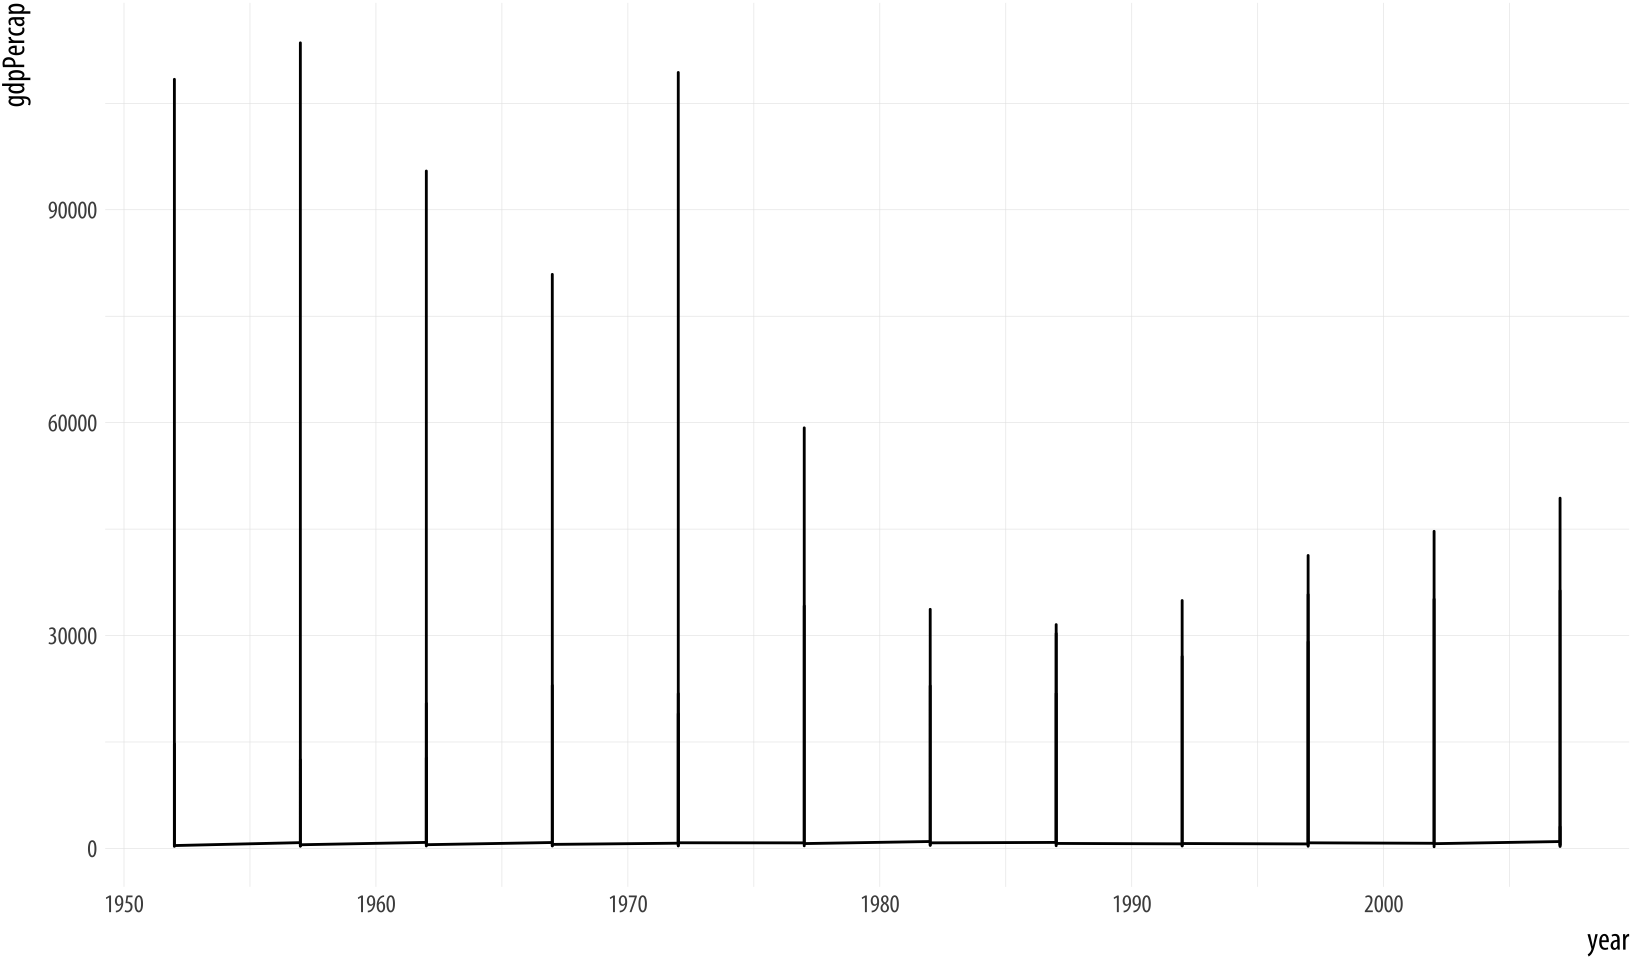 Trying to plot the data over time by country.